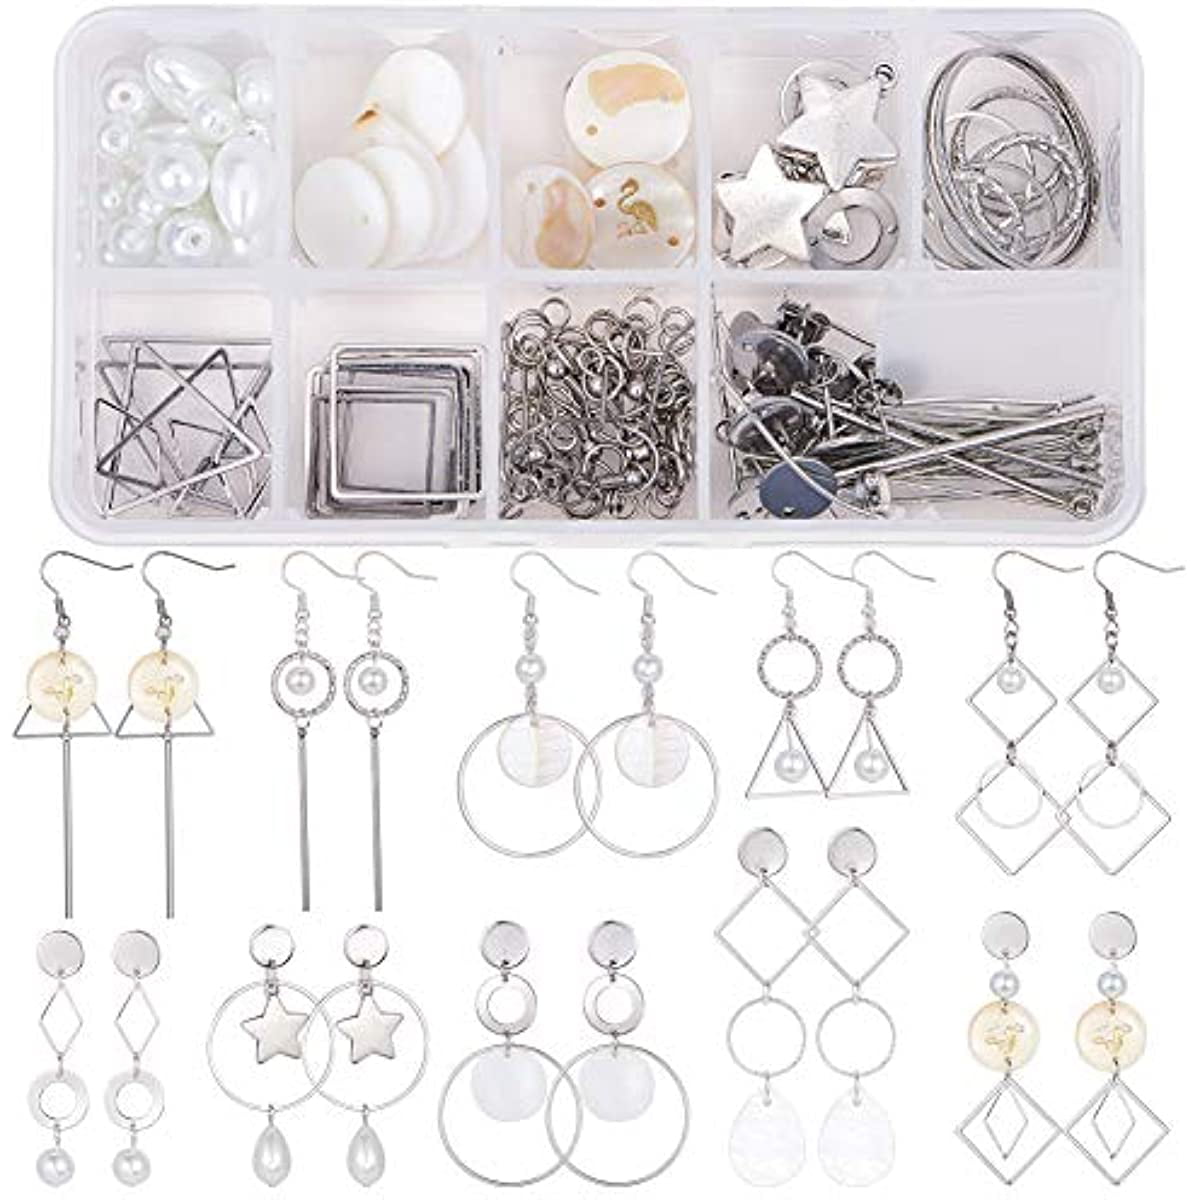 CALANDIS 1 Set Jewelry Finding Starter Kit Lobster Clasp Open Ring DIY  Craft with Box : Amazon.in: Home & Kitchen